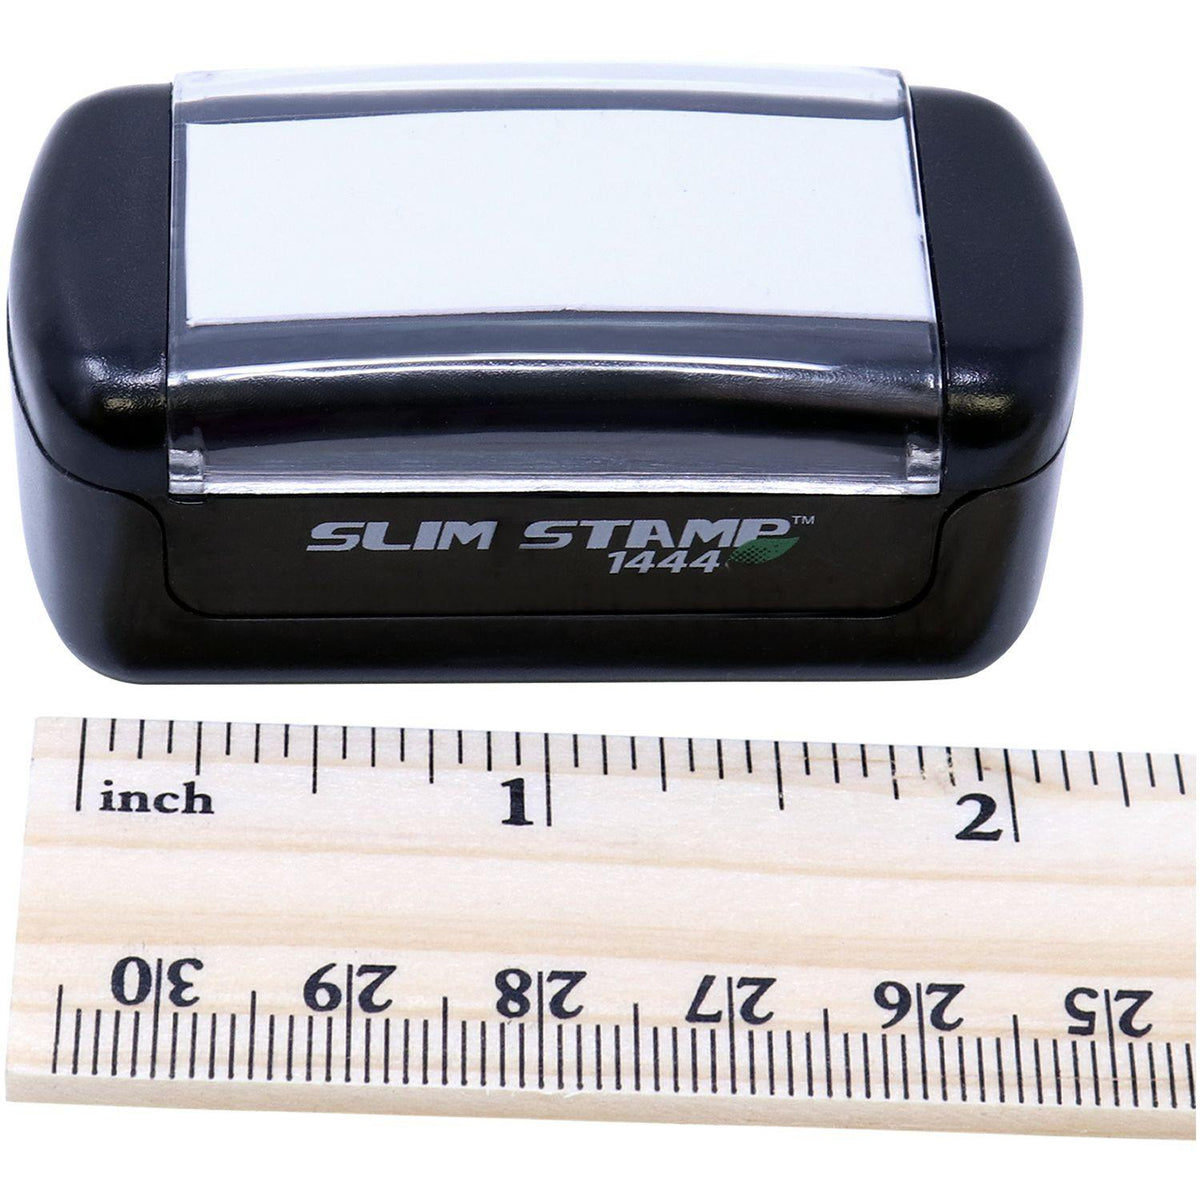 Measurement Slim Pre-Inked Confidential with Envelope Stamp with Ruler